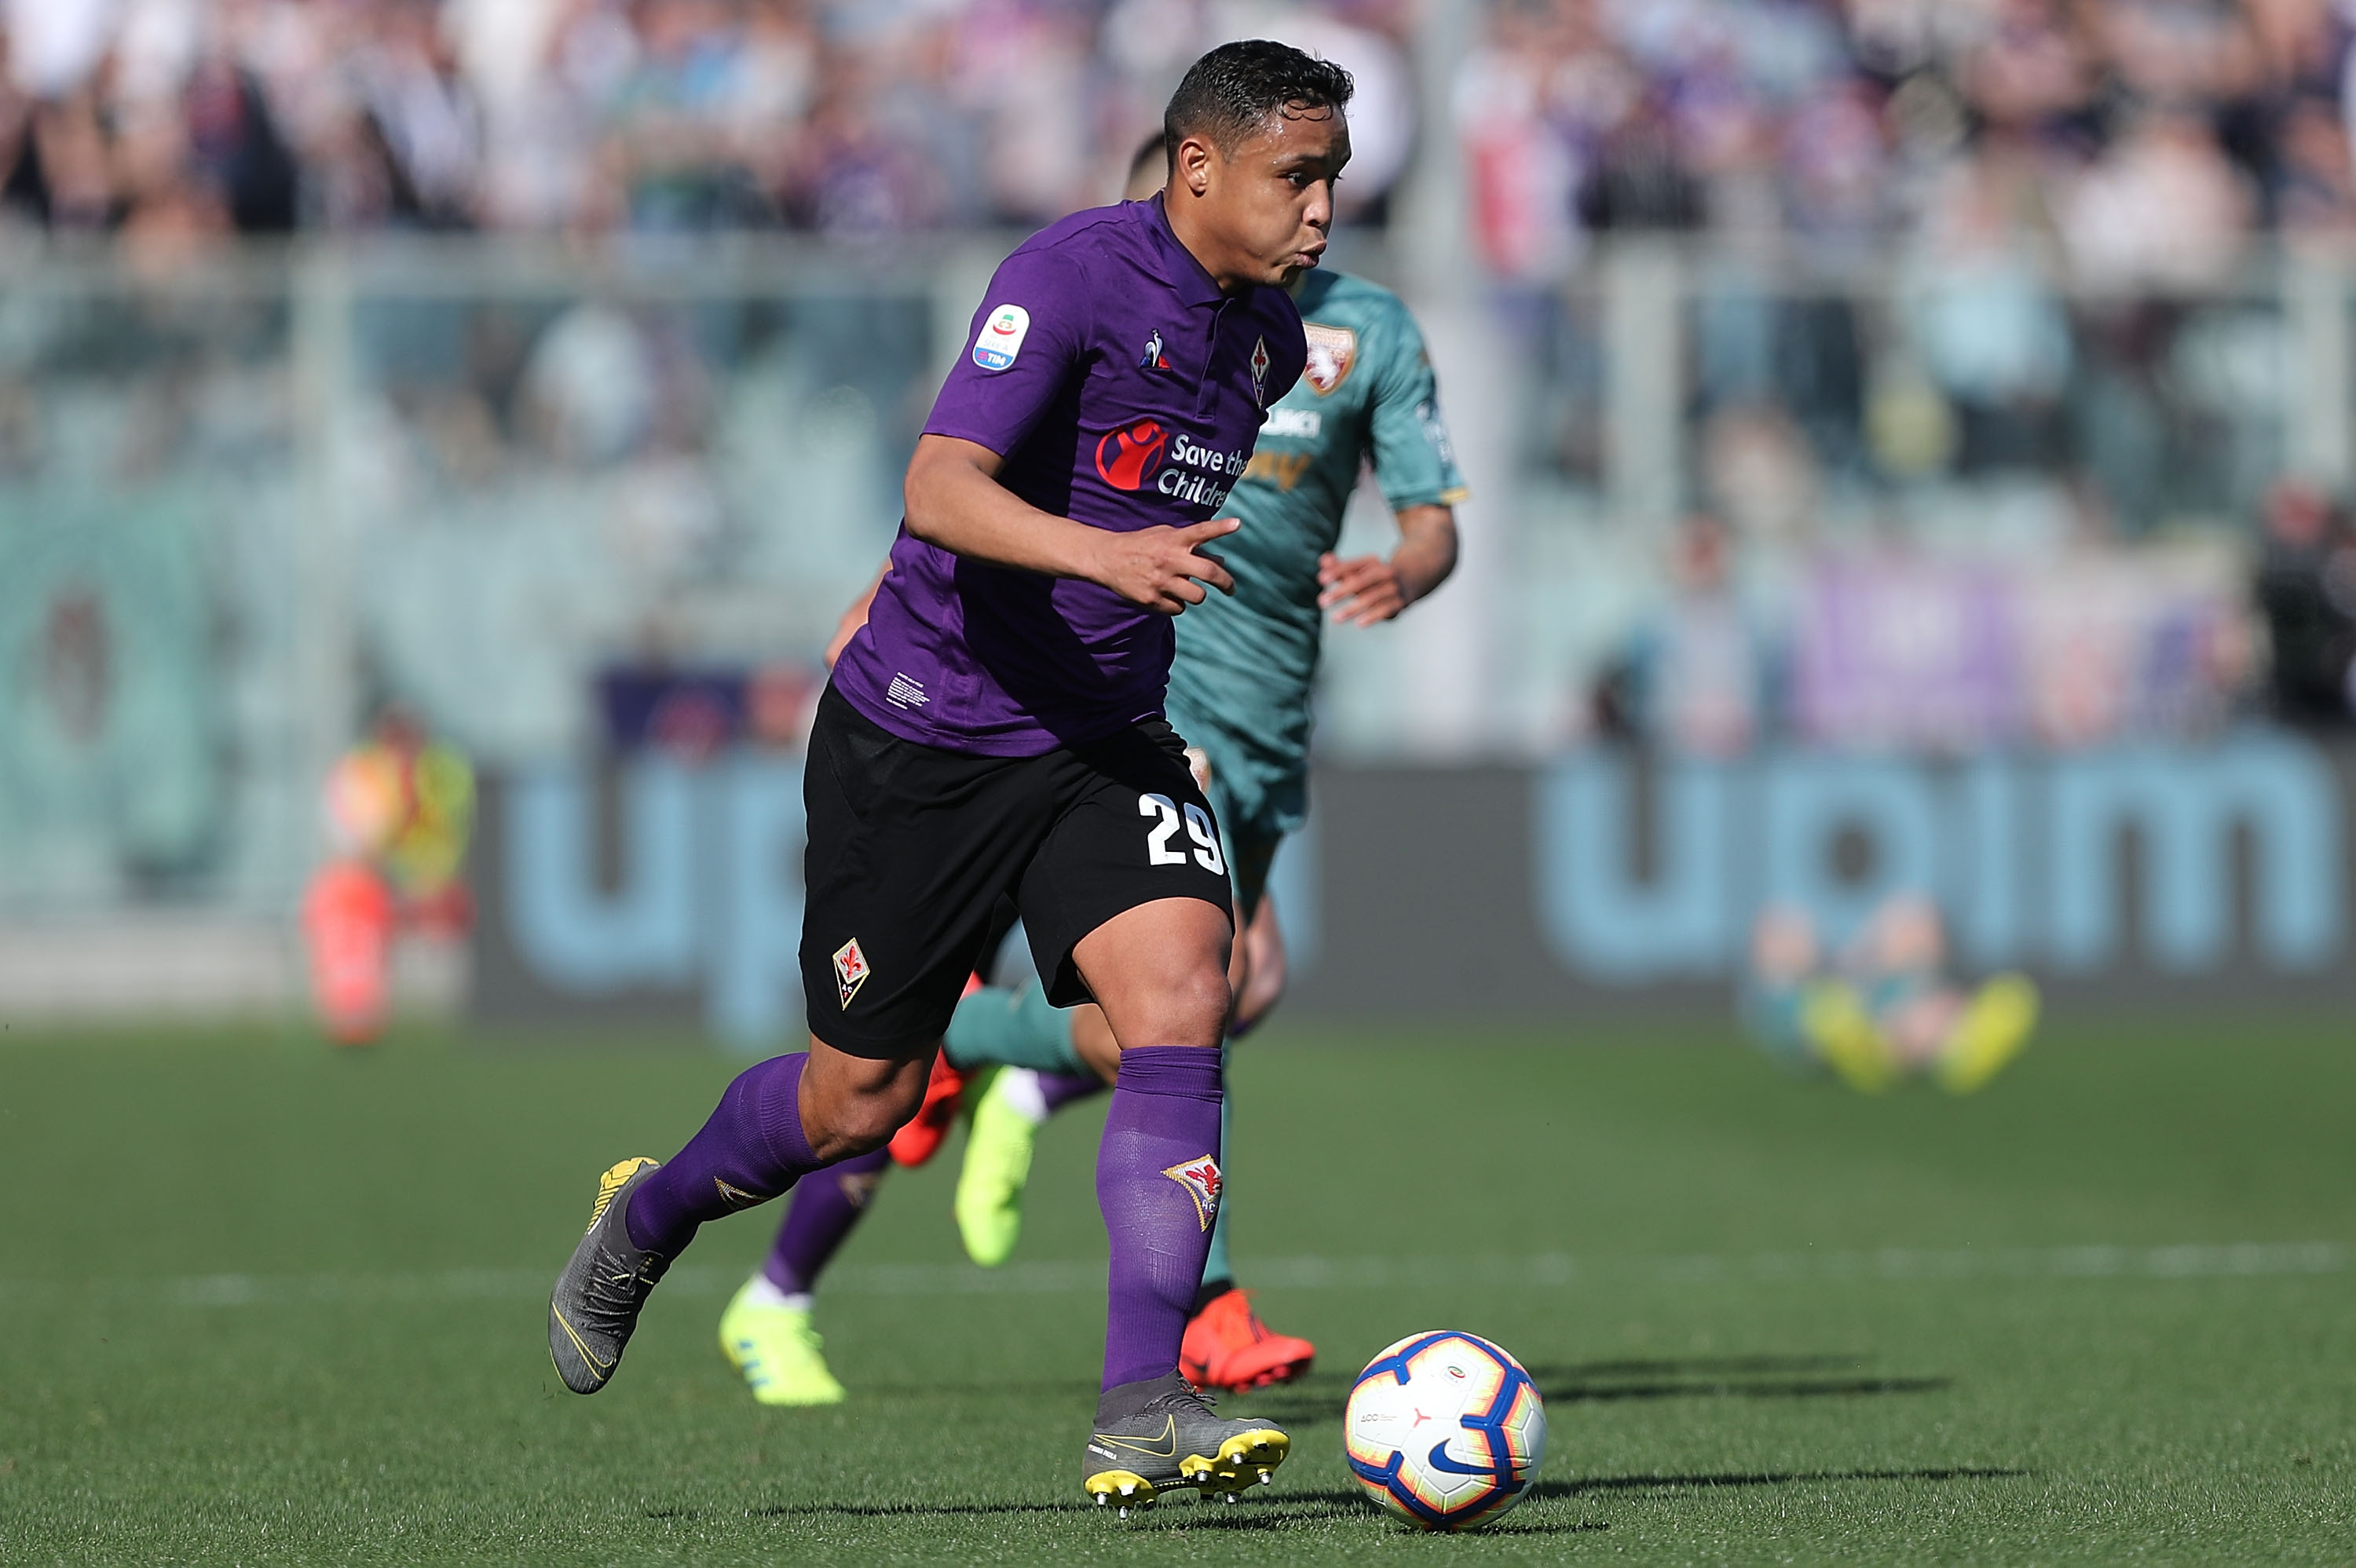 FLORENCE, ITALY - MARCH 31: Luis Muriel of ACF Fiorentina in action during the Serie A match between ACF Fiorentina and Torino FC at Stadio Artemio Franchi on March 31, 2019 in Florence, Italy.  (Photo by Gabriele Maltinti/Getty Images)